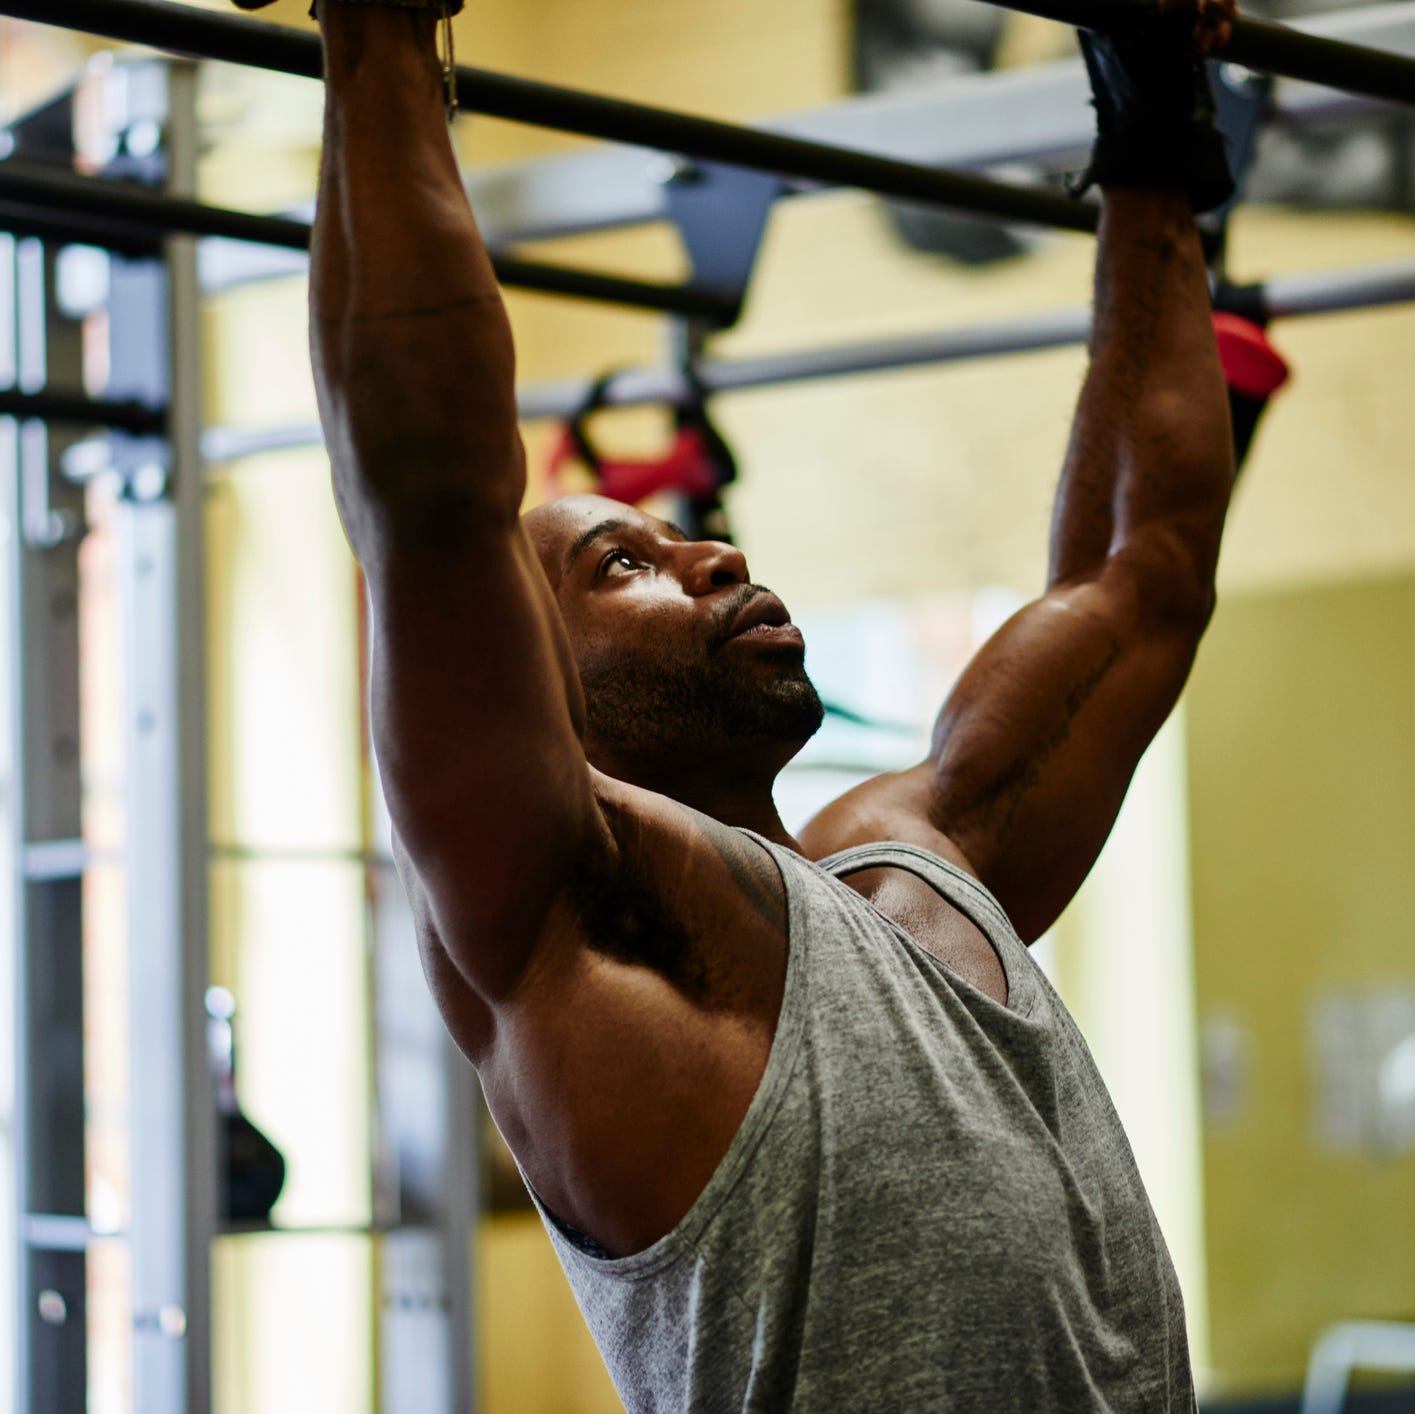 A Top Trainer Shared His Best Advice for Improving Your Pullups Quickly